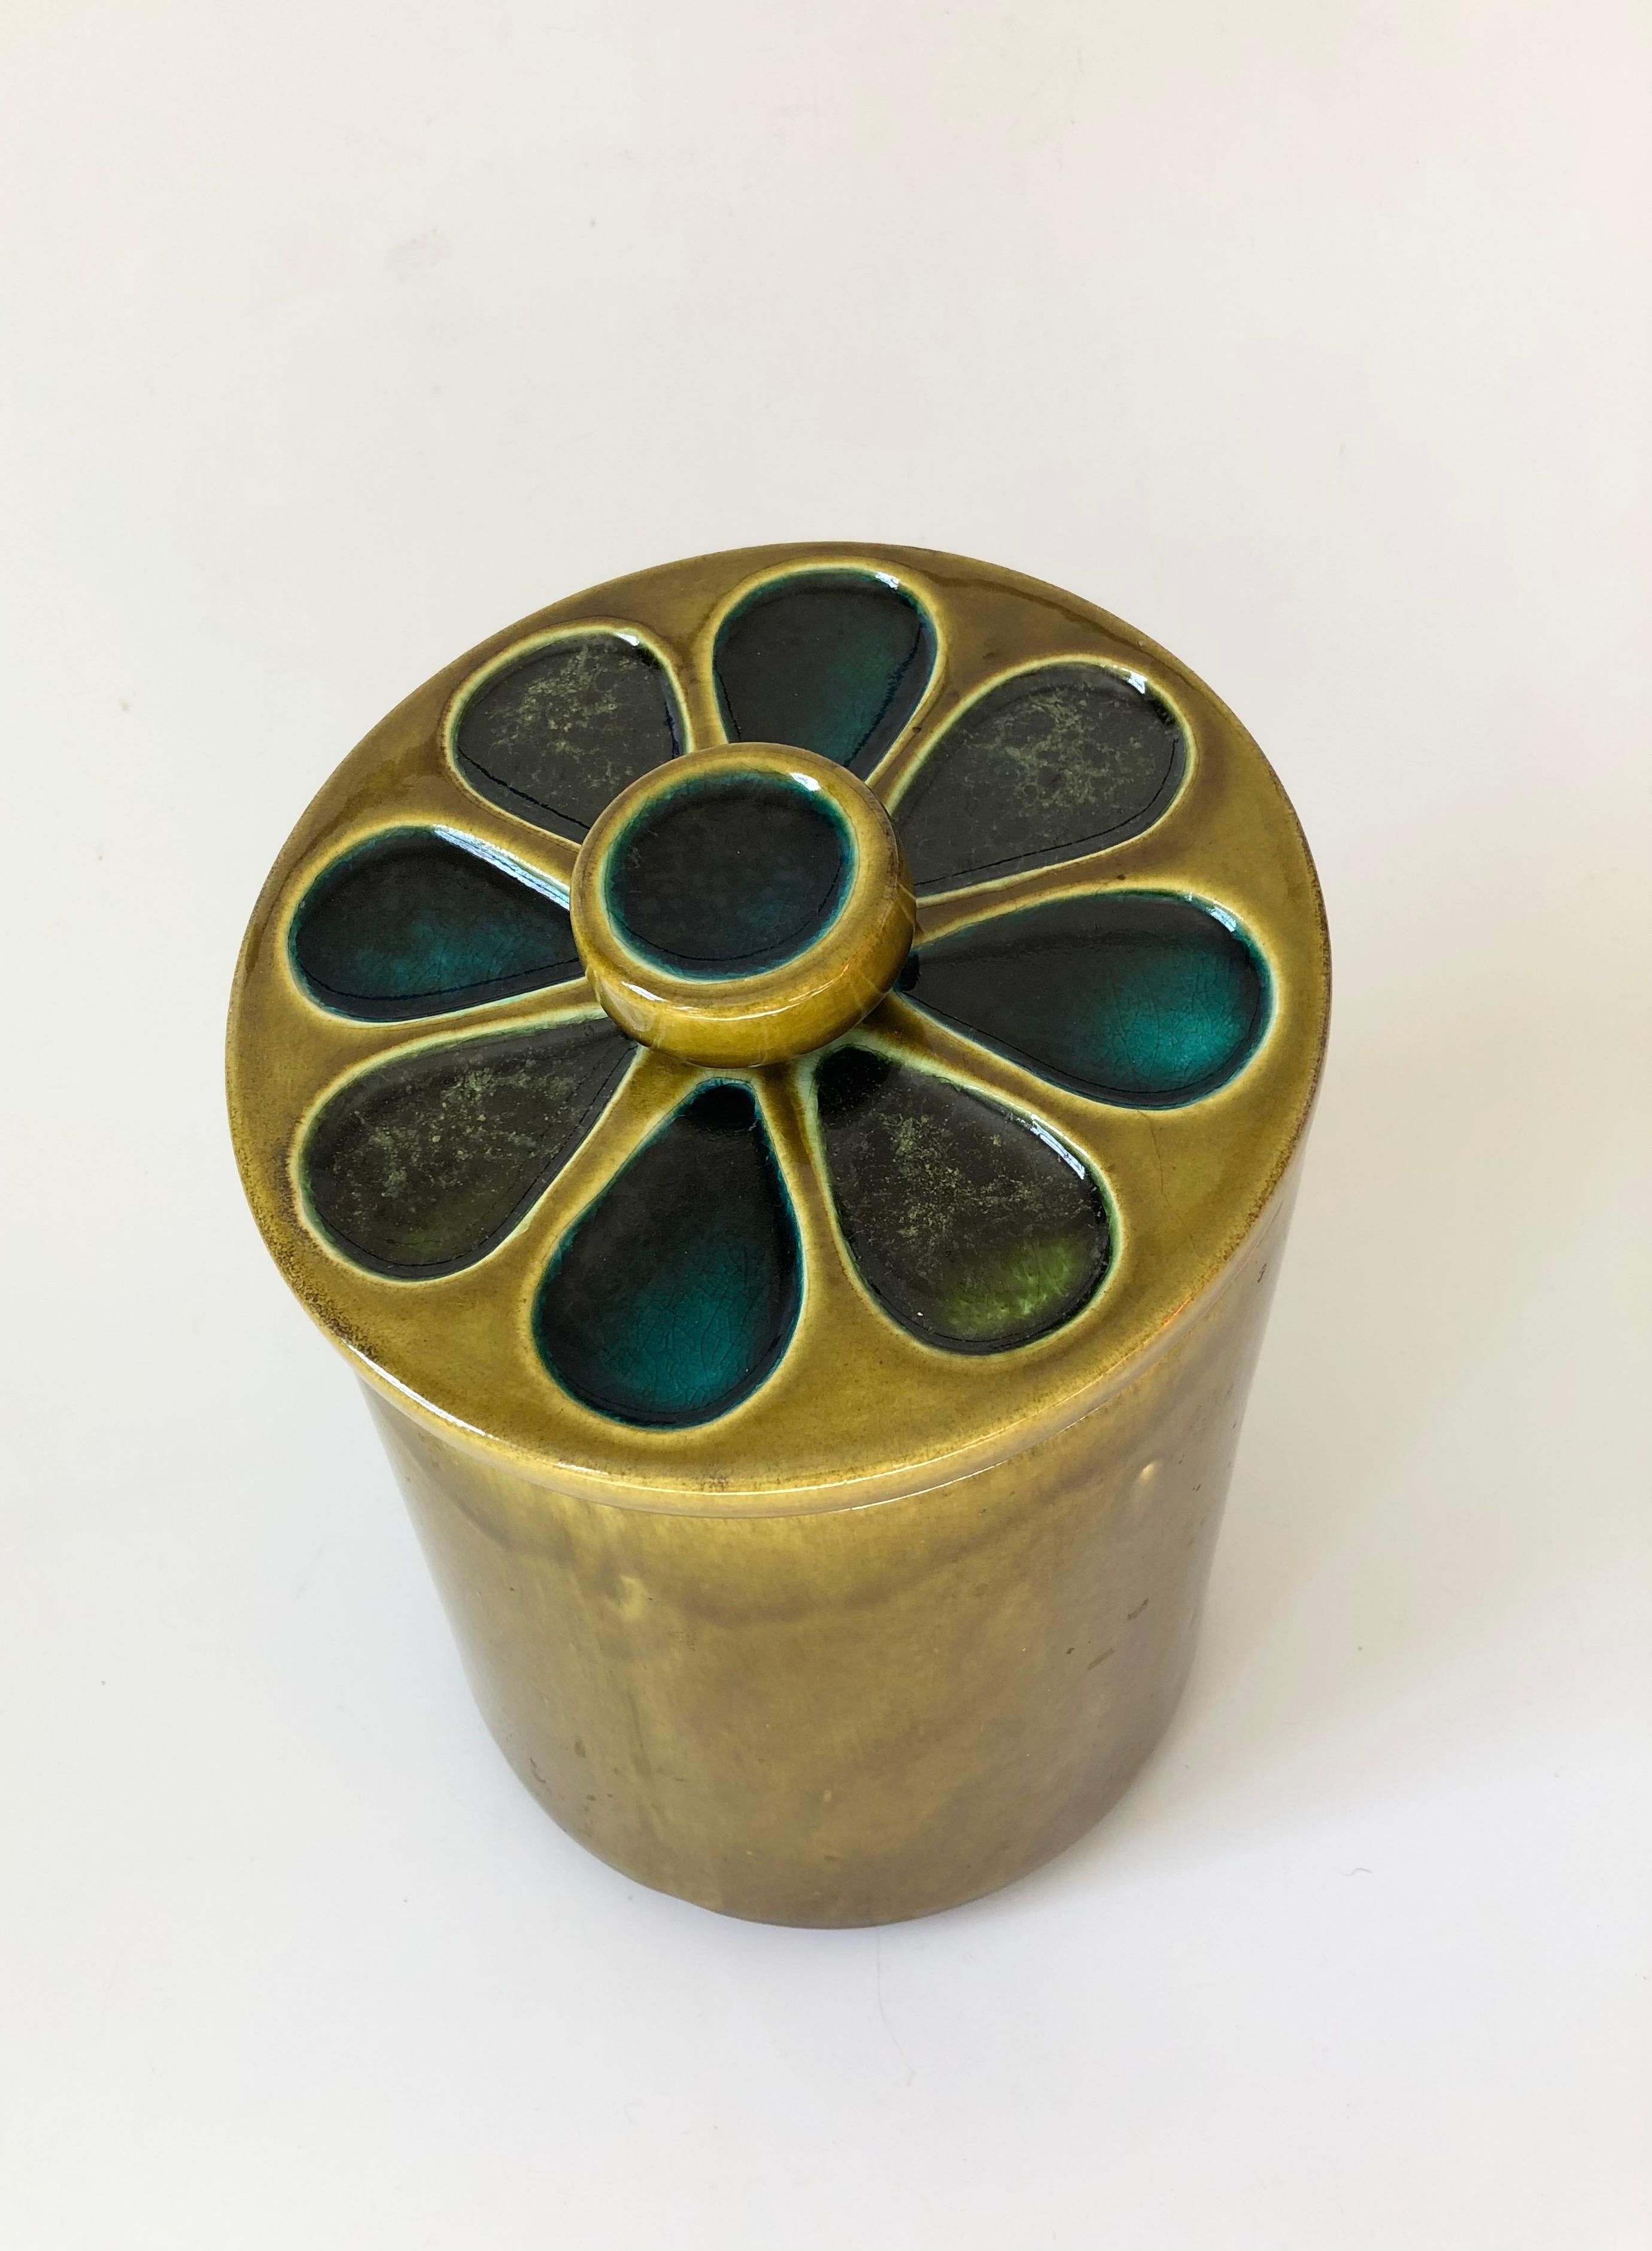 A mid century pottery kitchen canister. Flower design to the lid with a slightly angled top. Olive green glaze with blue petals to the flower on the lid. Made in California.

